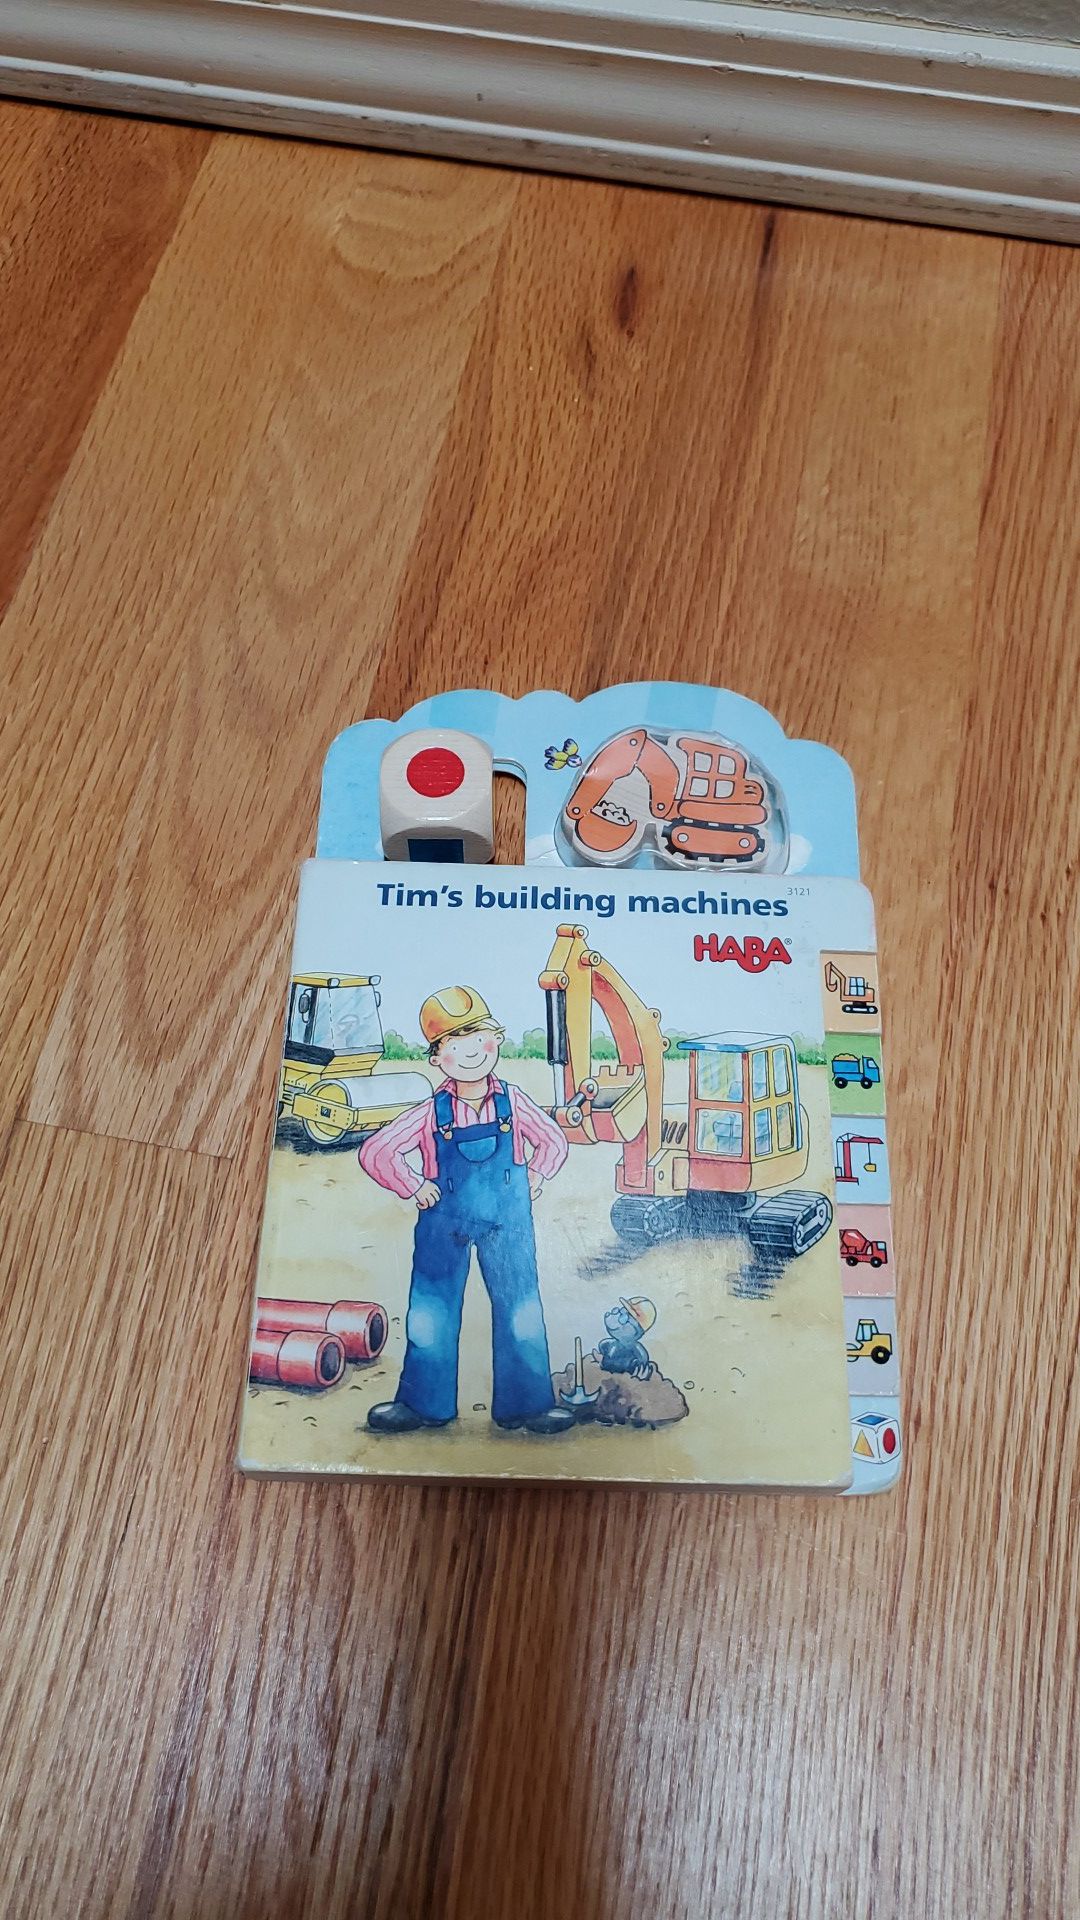 Haba construction puzzle and game board book.